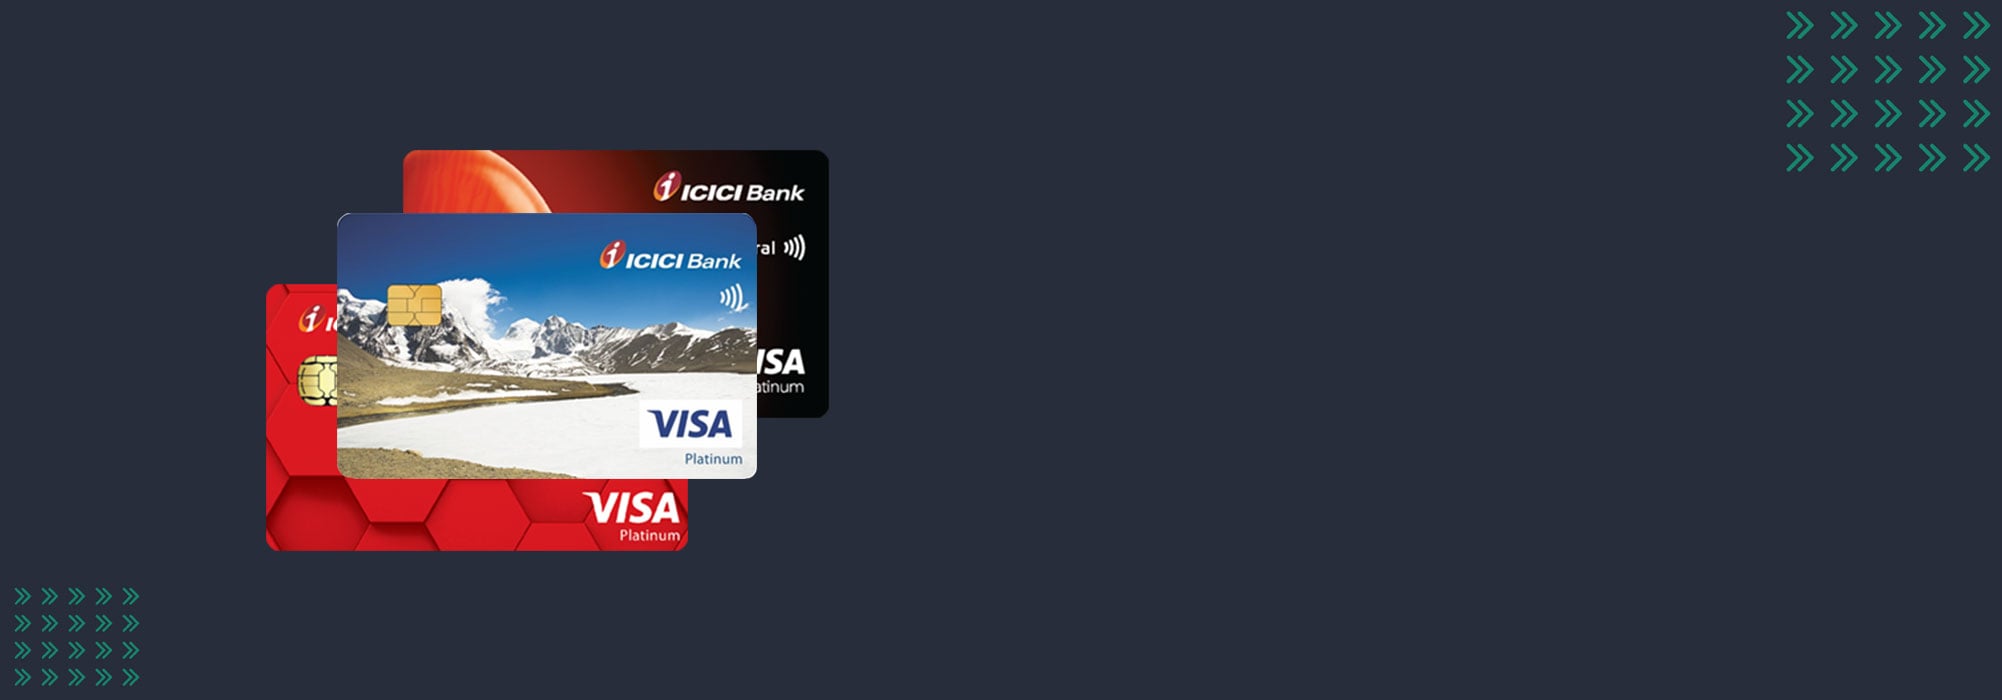 How To Block ICICI Credit Card By SMS